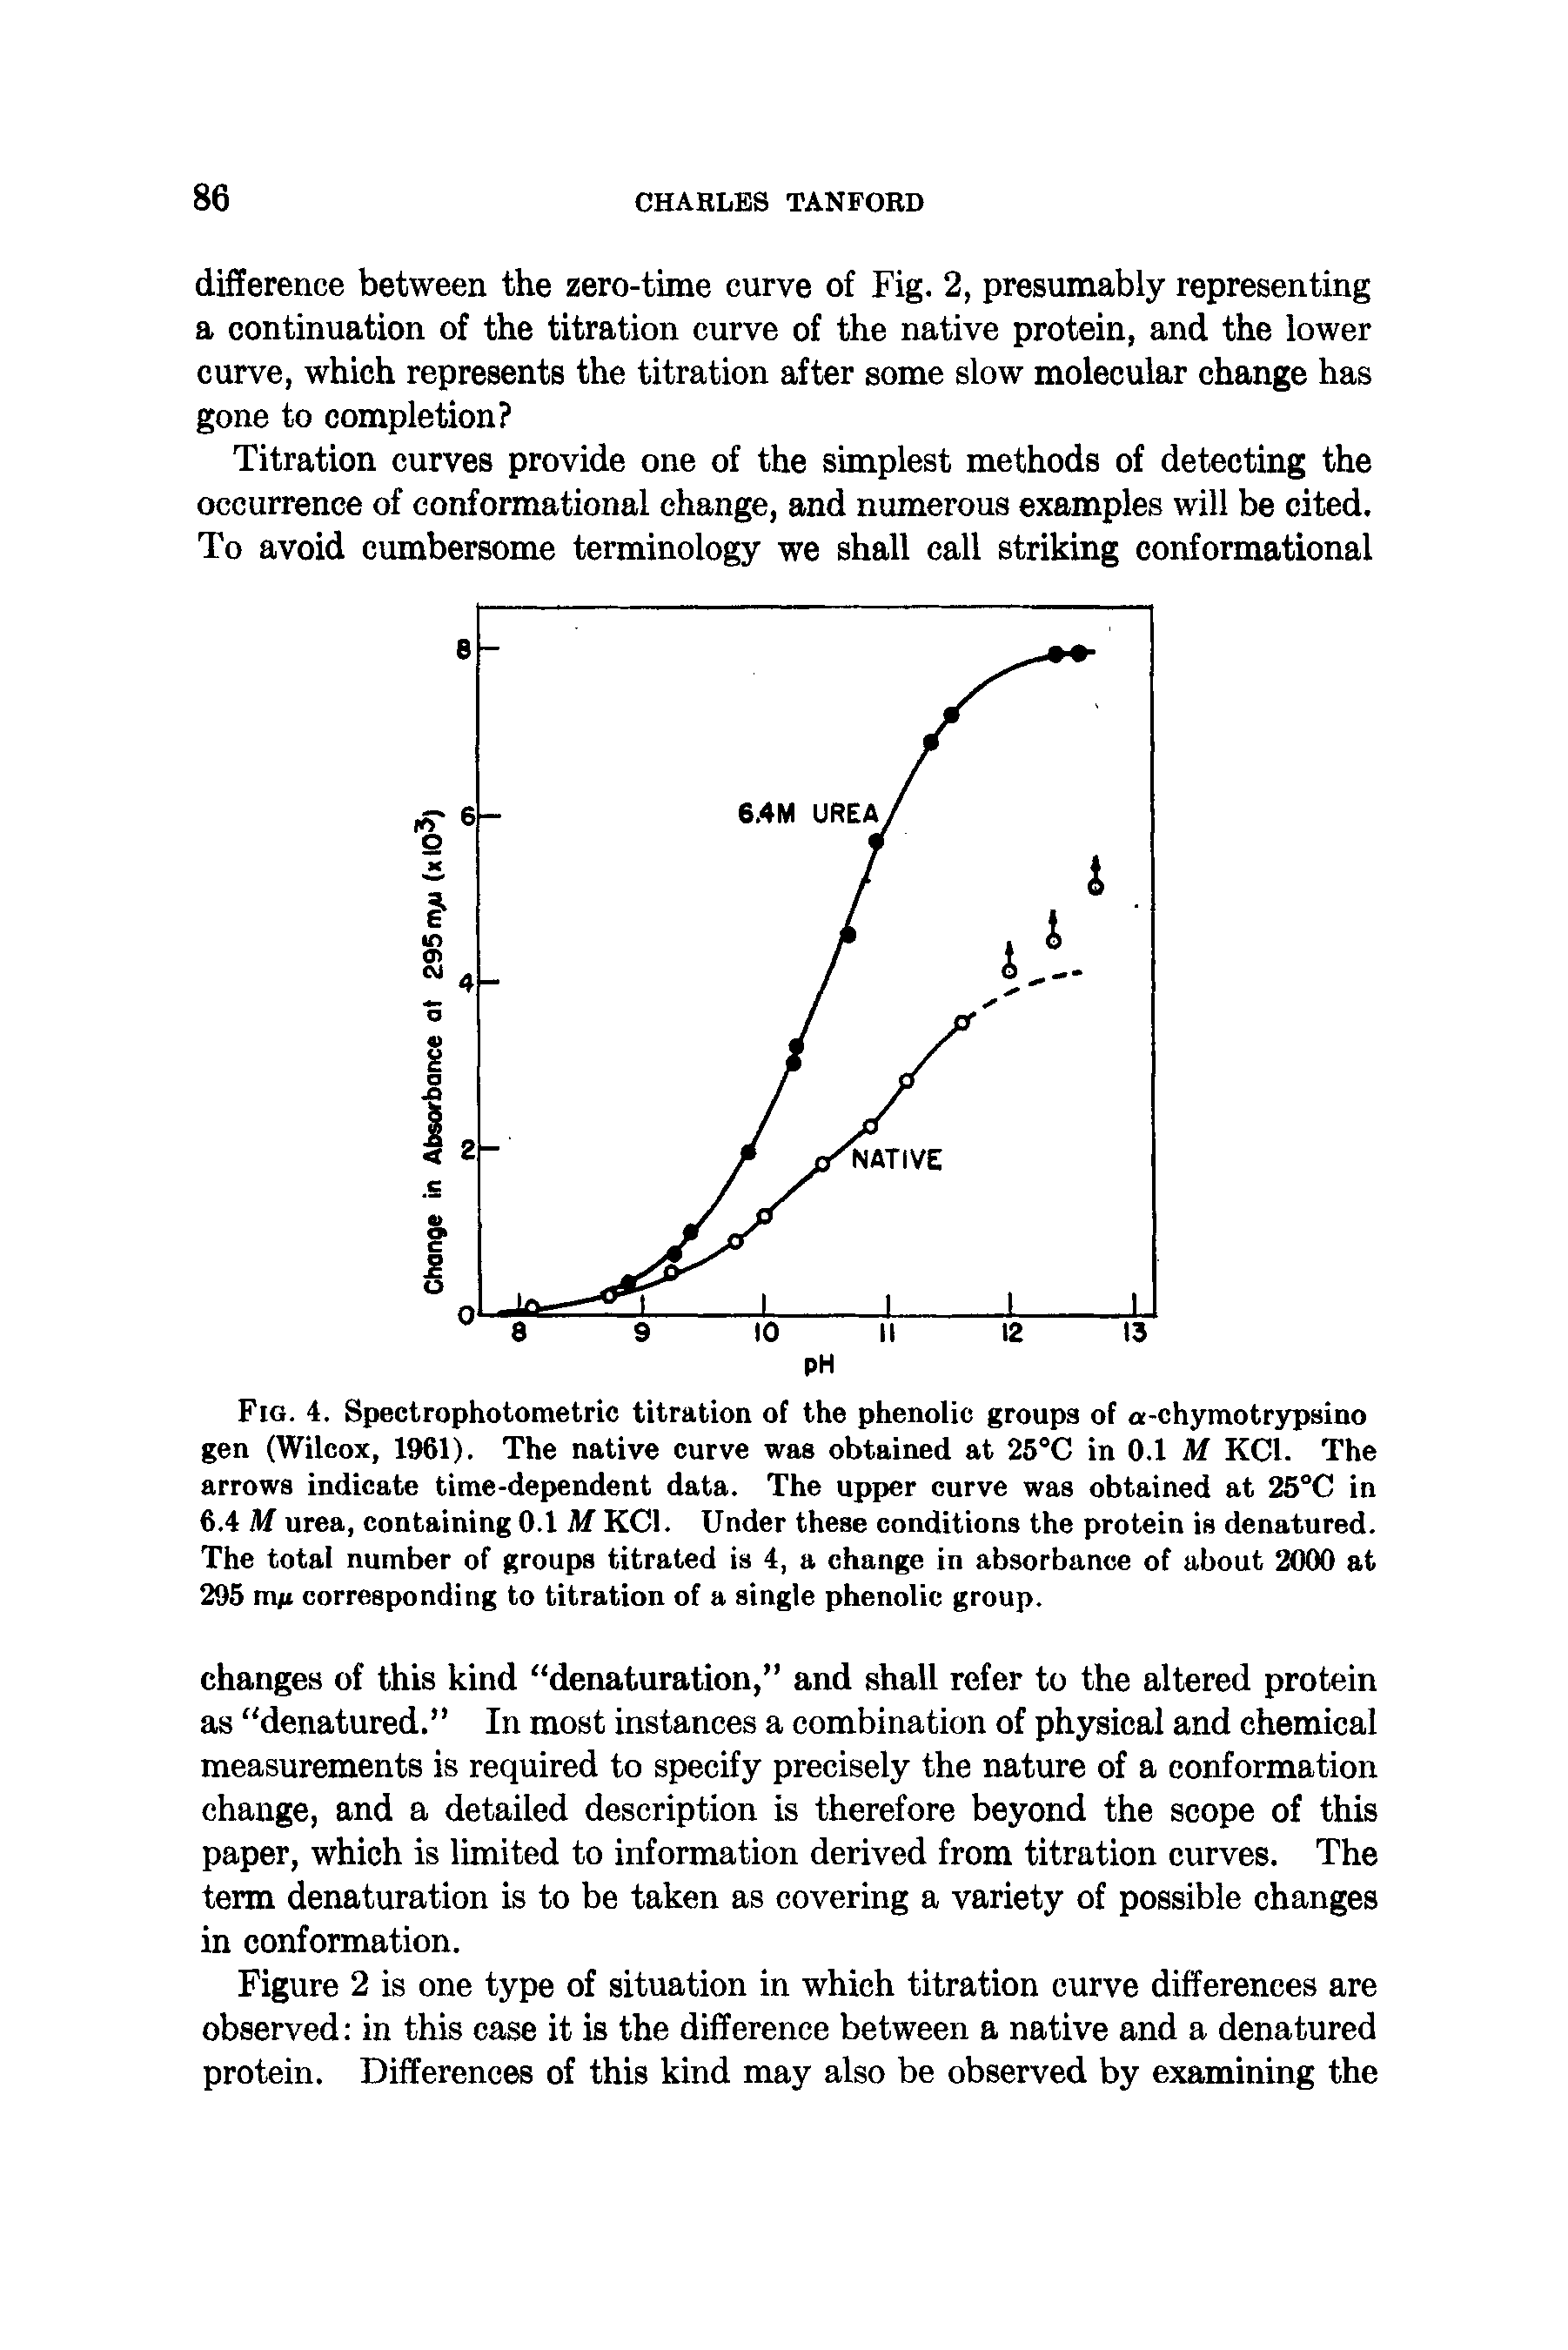 Fig. 4. Spectrophotometric titration of the phenolic groups of a-chymotrypsino gen (Wilcox, 1961). The native curve was obtained at 25°C in 0.1 M KCl. The arrows indicate time-dependent data. The upper curve was obtained at 25°C in 6.4 M urea, containing 0.1 M KCl. Under these conditions the protein is denatured. The total number of groups titrated is 4, a change in absorbance of about 2000 at 295 m/t corresponding to titration of a single phenolic group.